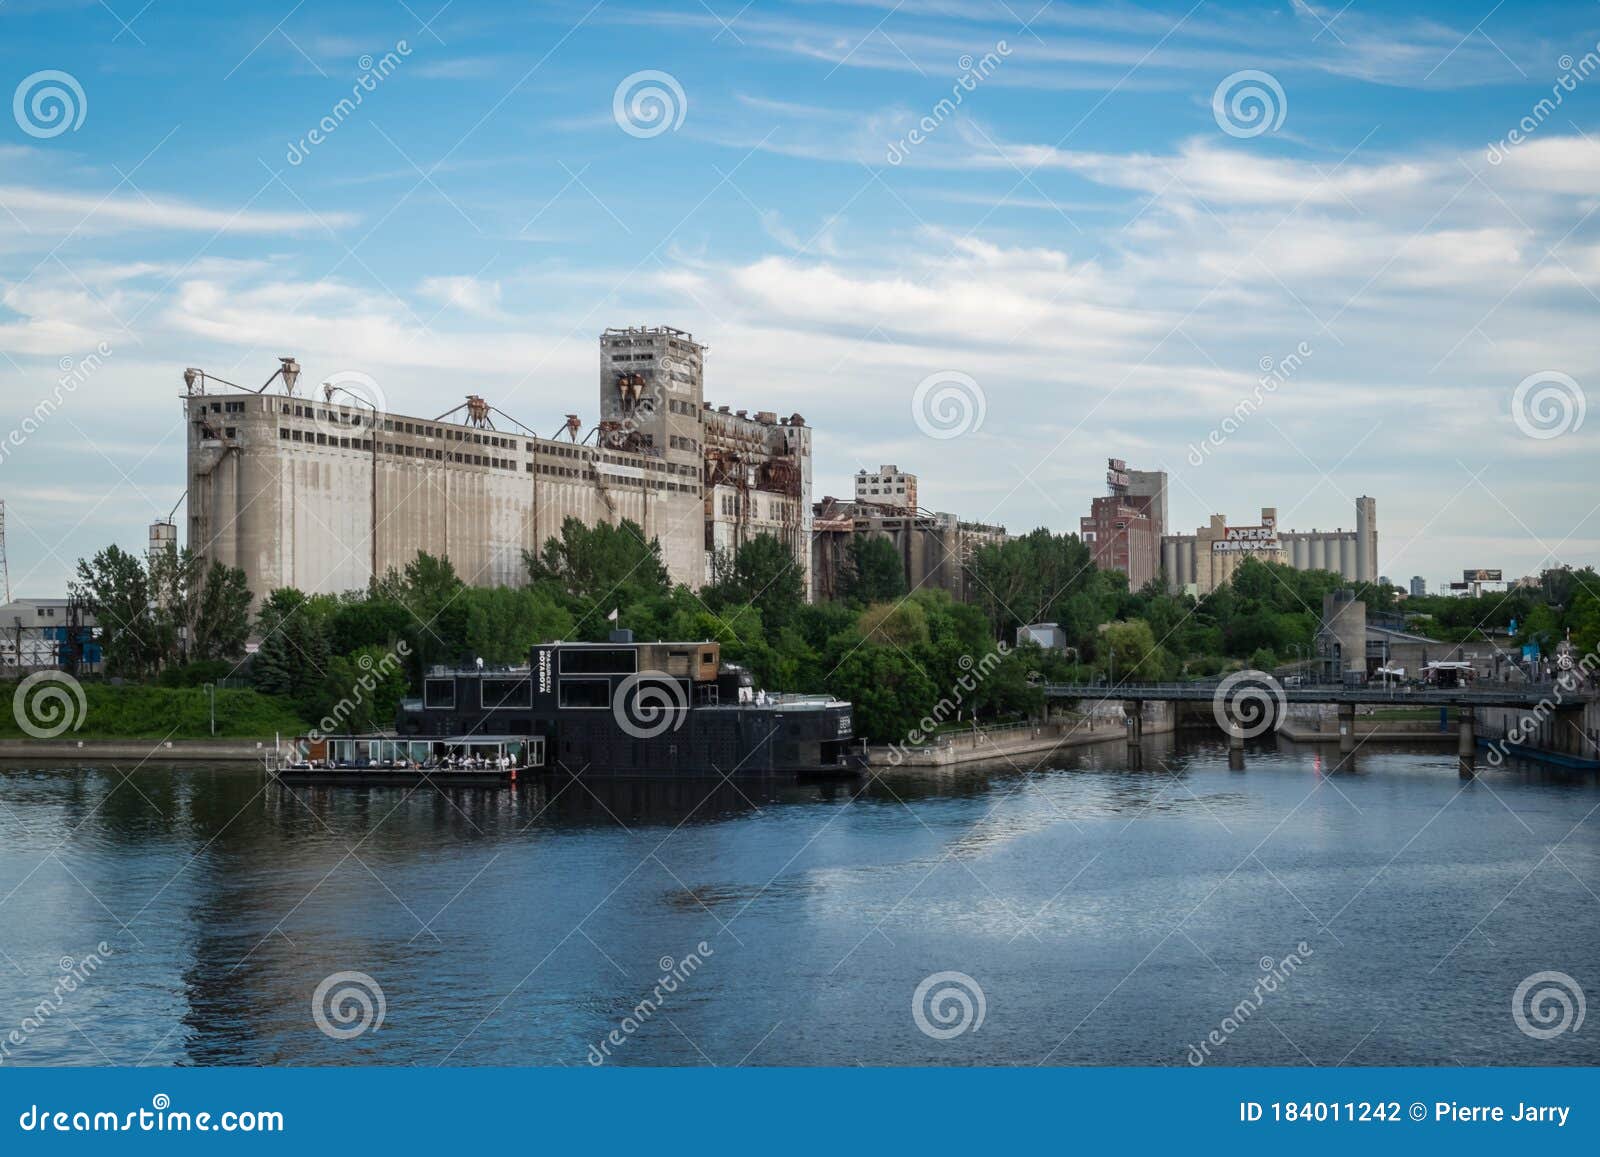 montreal famous building silo 5 by the river and showing bota bota spa